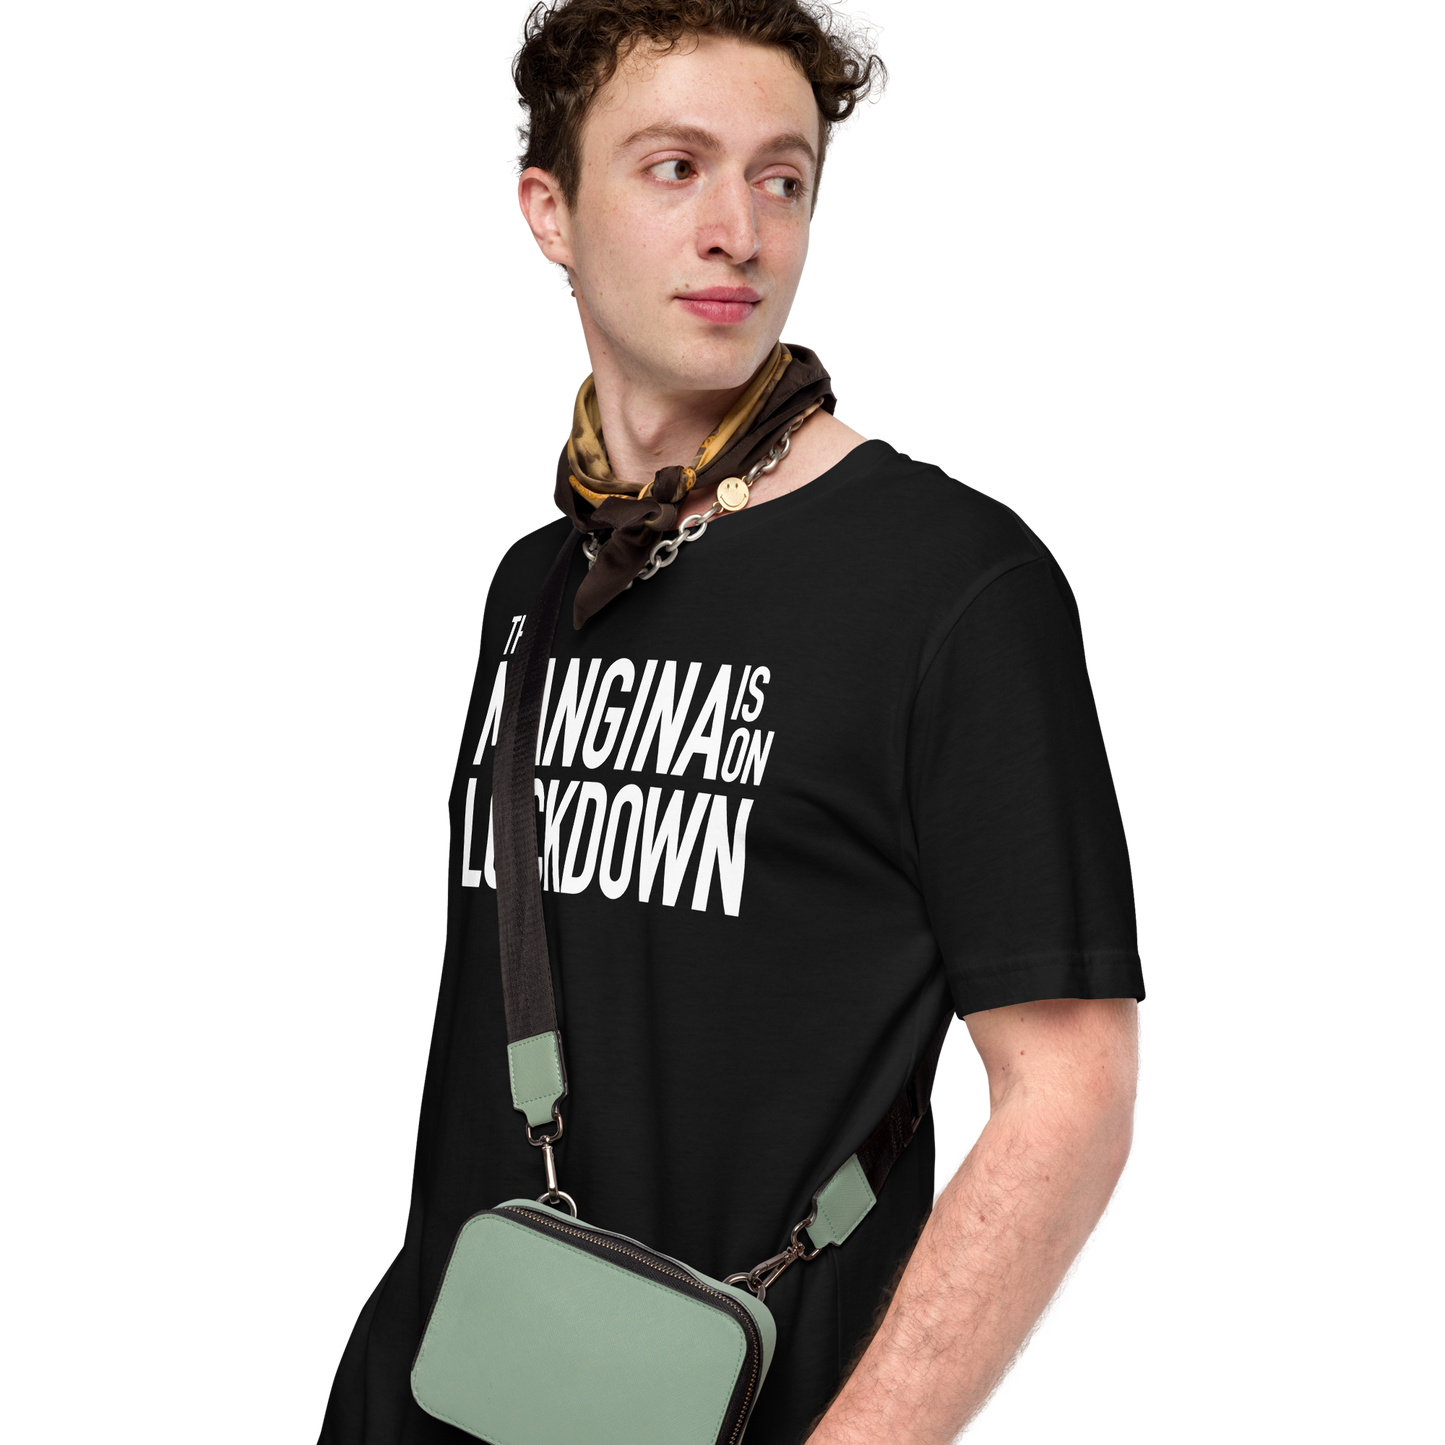 This Mangina is on Lockdown - Funny T-Shirt